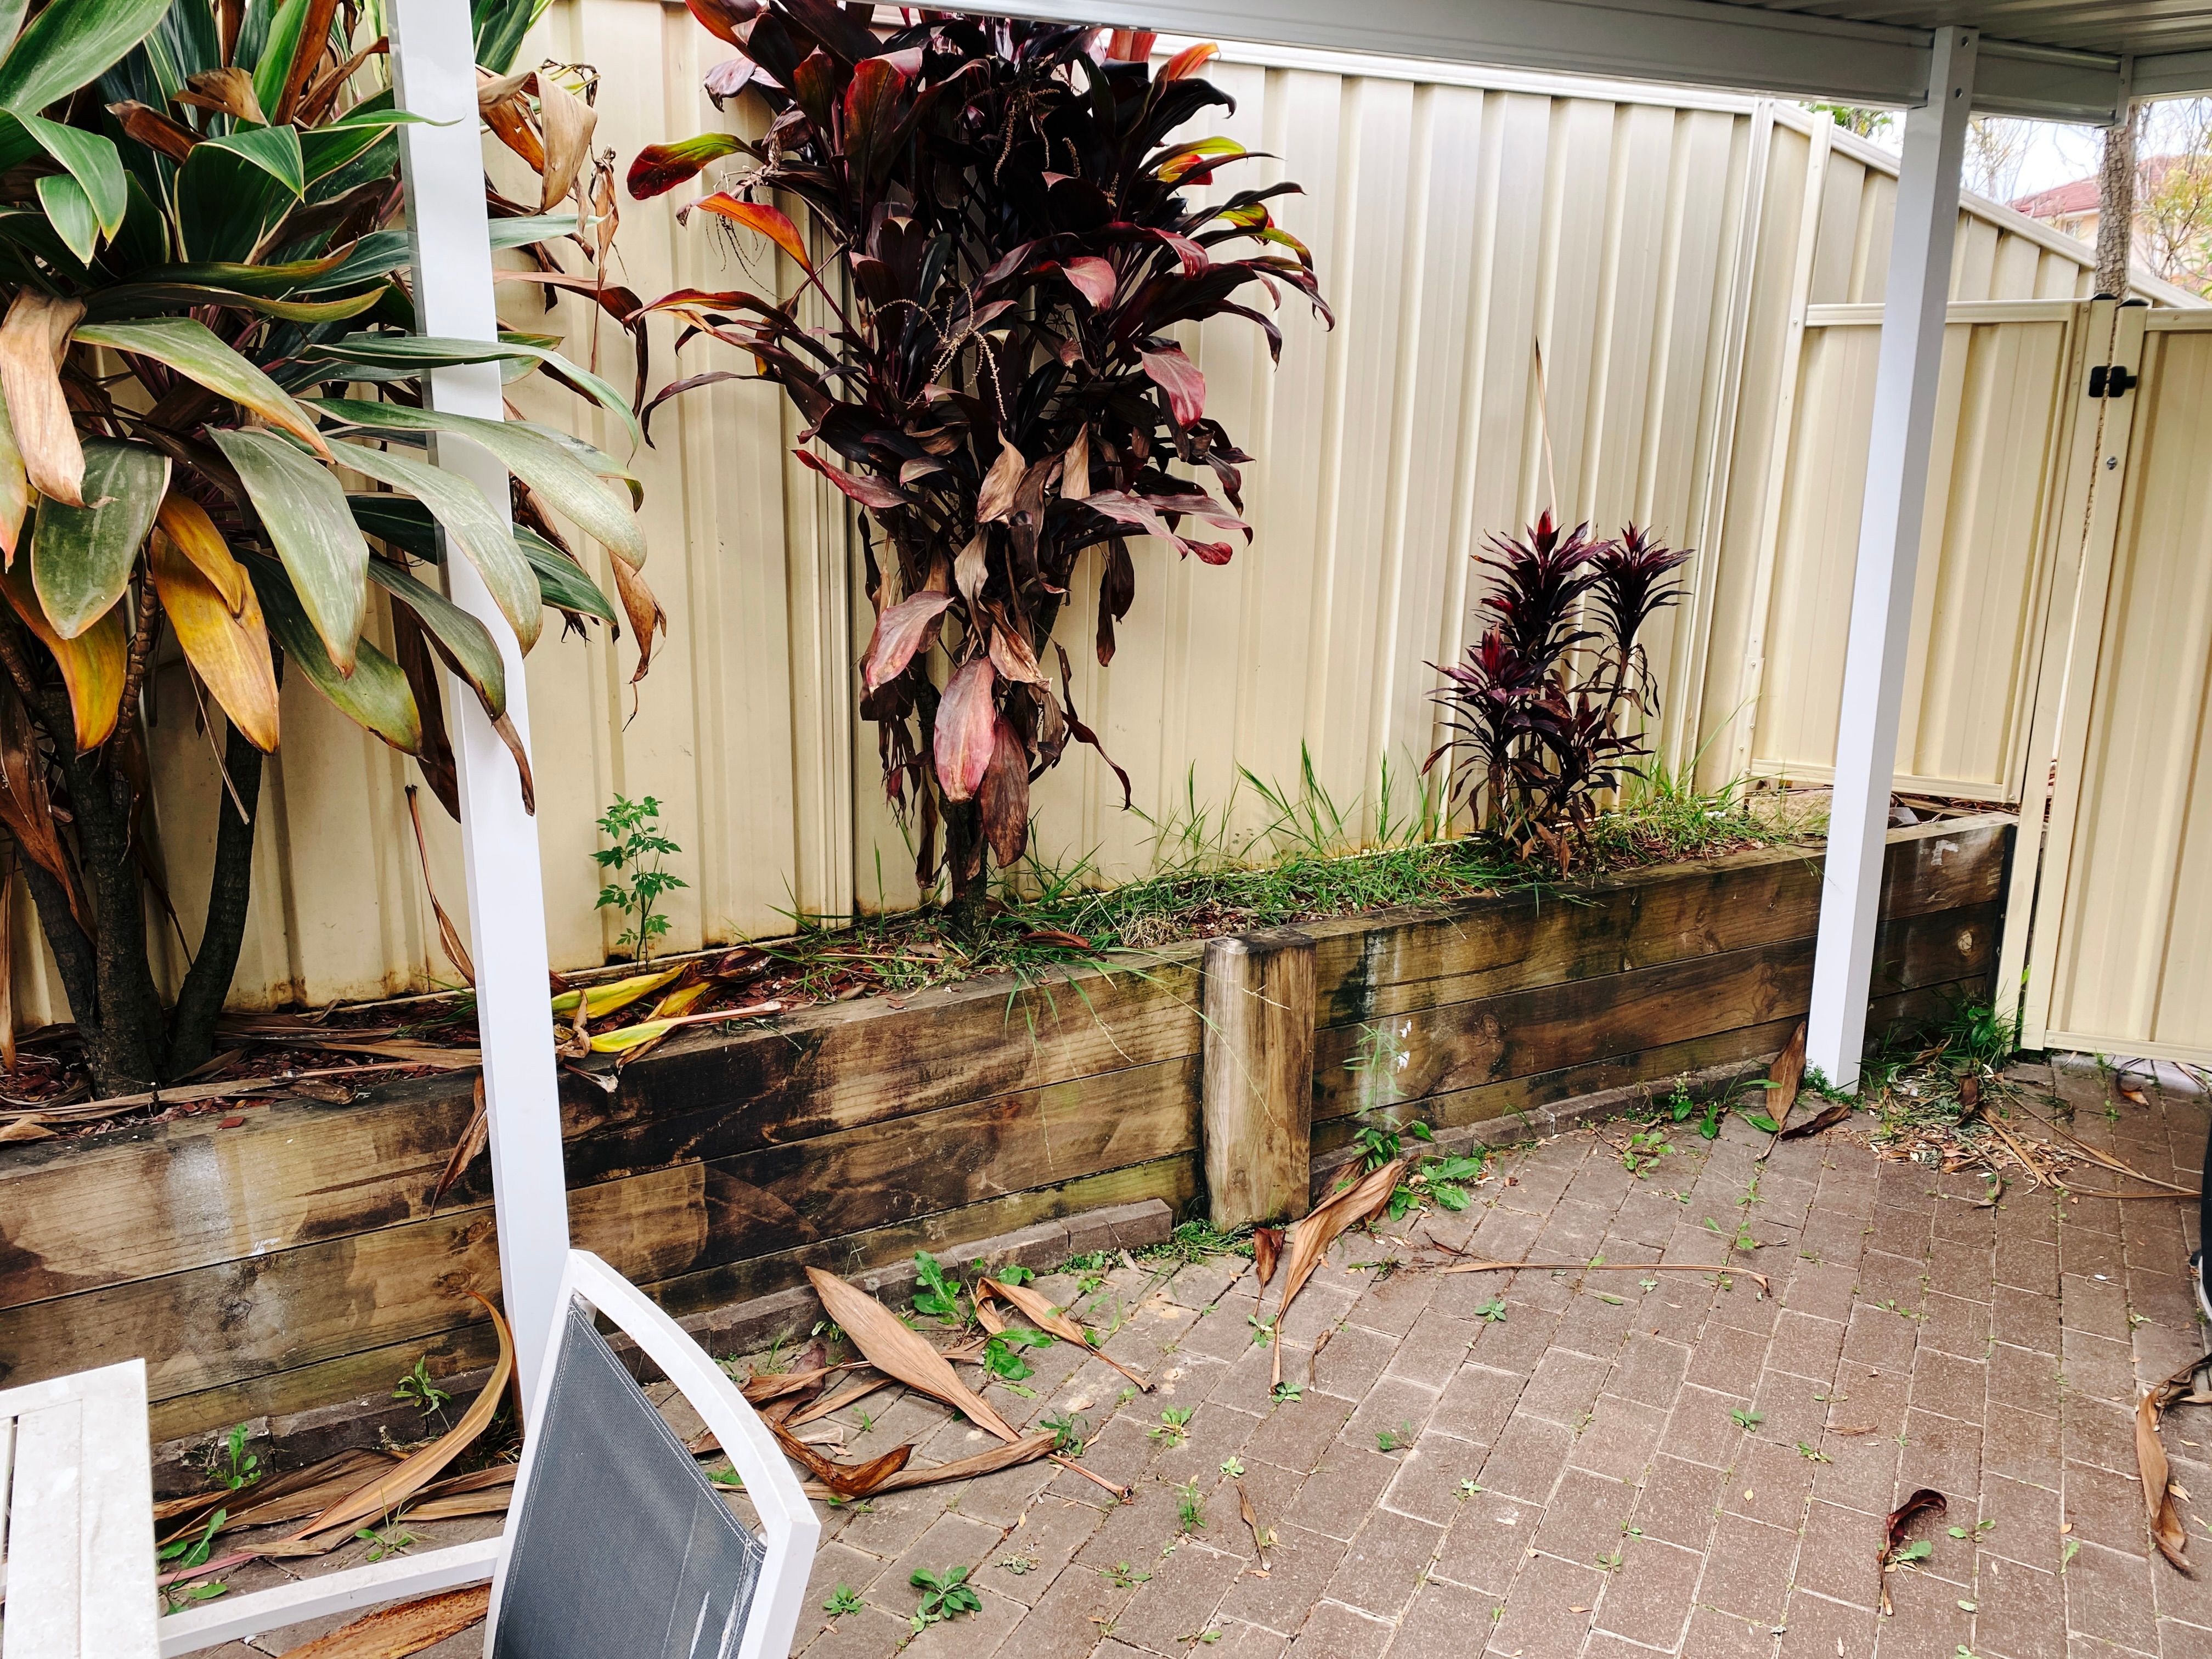 A photo of a narrow raised garden bed alongside a fence, there's two palm-type trees in it, a fair few grassy weeds, and the red mulch coverage is fairly patchy and it looks very dull.